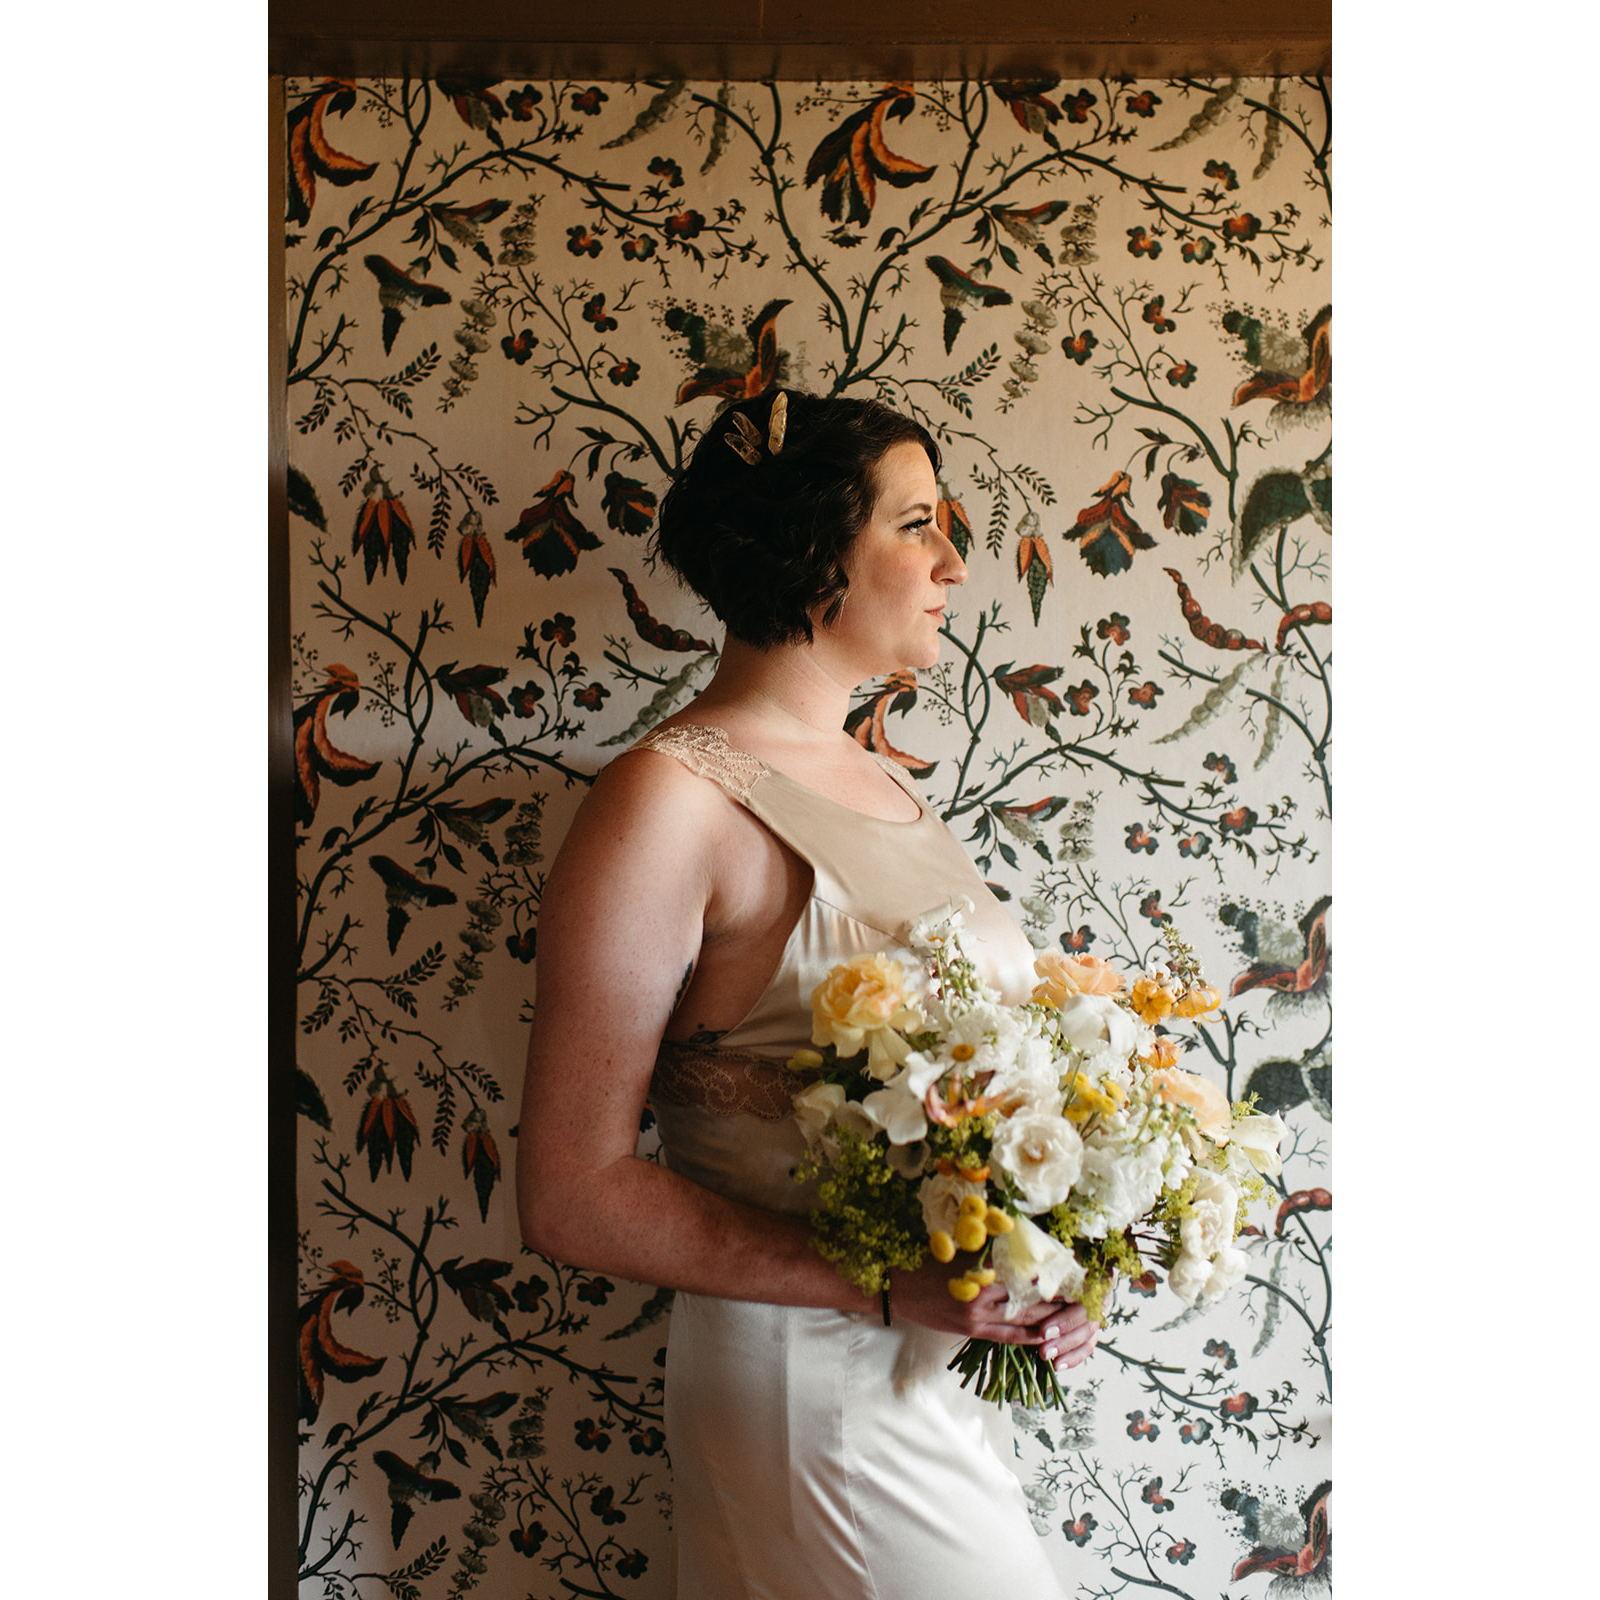 Rachel wore citrine pieces in her hair, a crystal that represents sunshine, light, and happiness, as well as success. Her bouquet was filled with gorgeous, locally sourced flowers by Helios Floral.